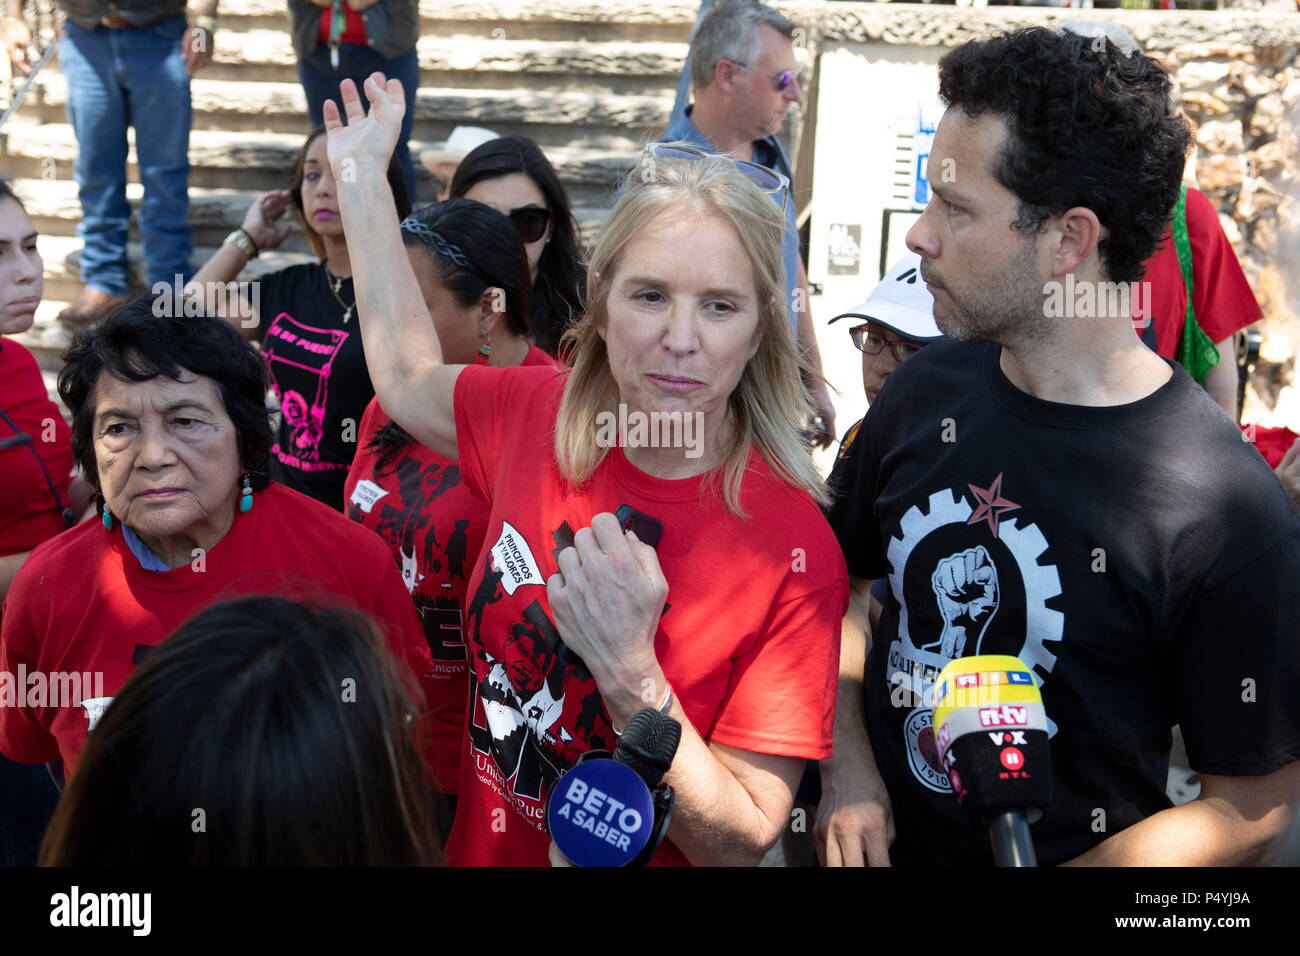 Kerry Kennedy, director of the Robert F. Kennedy Center for Justice and daughter of Robert and Ethel Kennedy, talks to the press while kicking off a 24-day hunger strike protesting Pres. Donald Trump's immigration policies during a rally on the U.S.-Mexican border in McAllen, Texas. Stock Photo